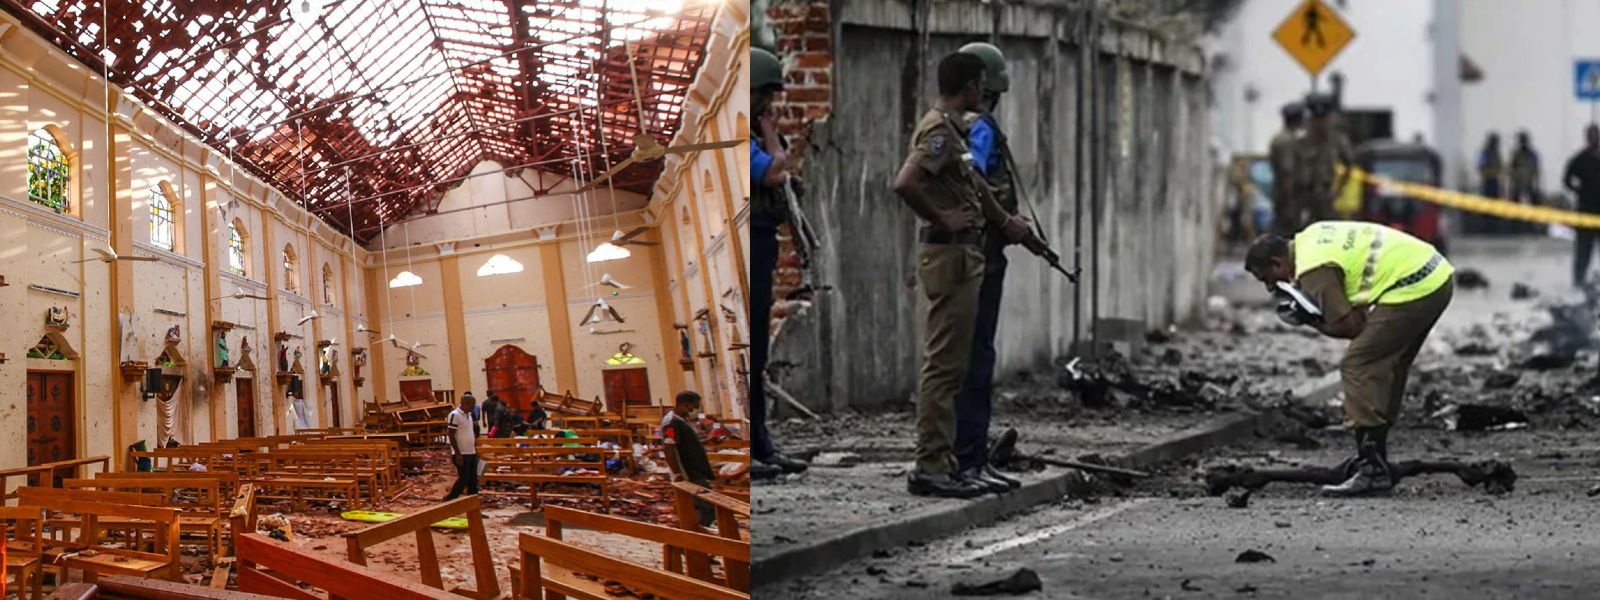 ‘I did not give Maithripala Sirisena specific intel on Easter Attacks’ – Former SIS Chief